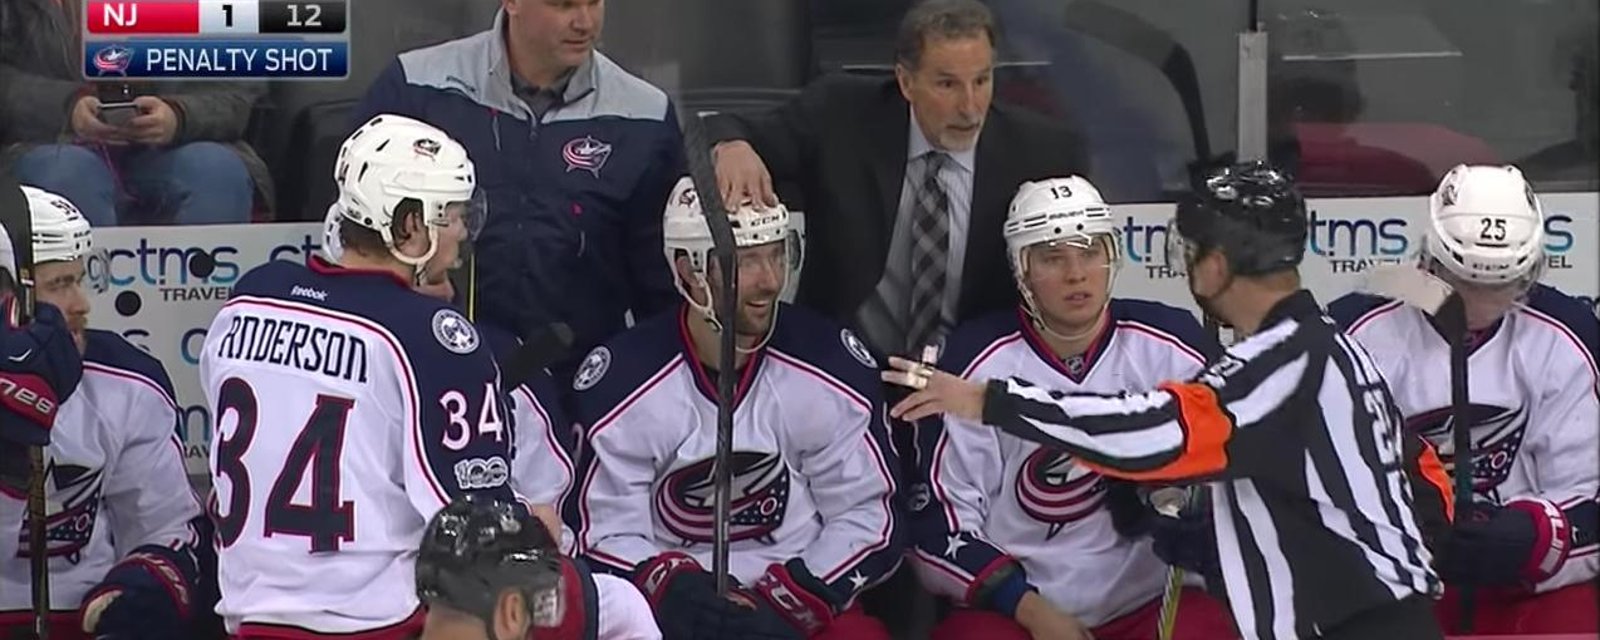 Tortorella is caught blatantly twisting the rules! 